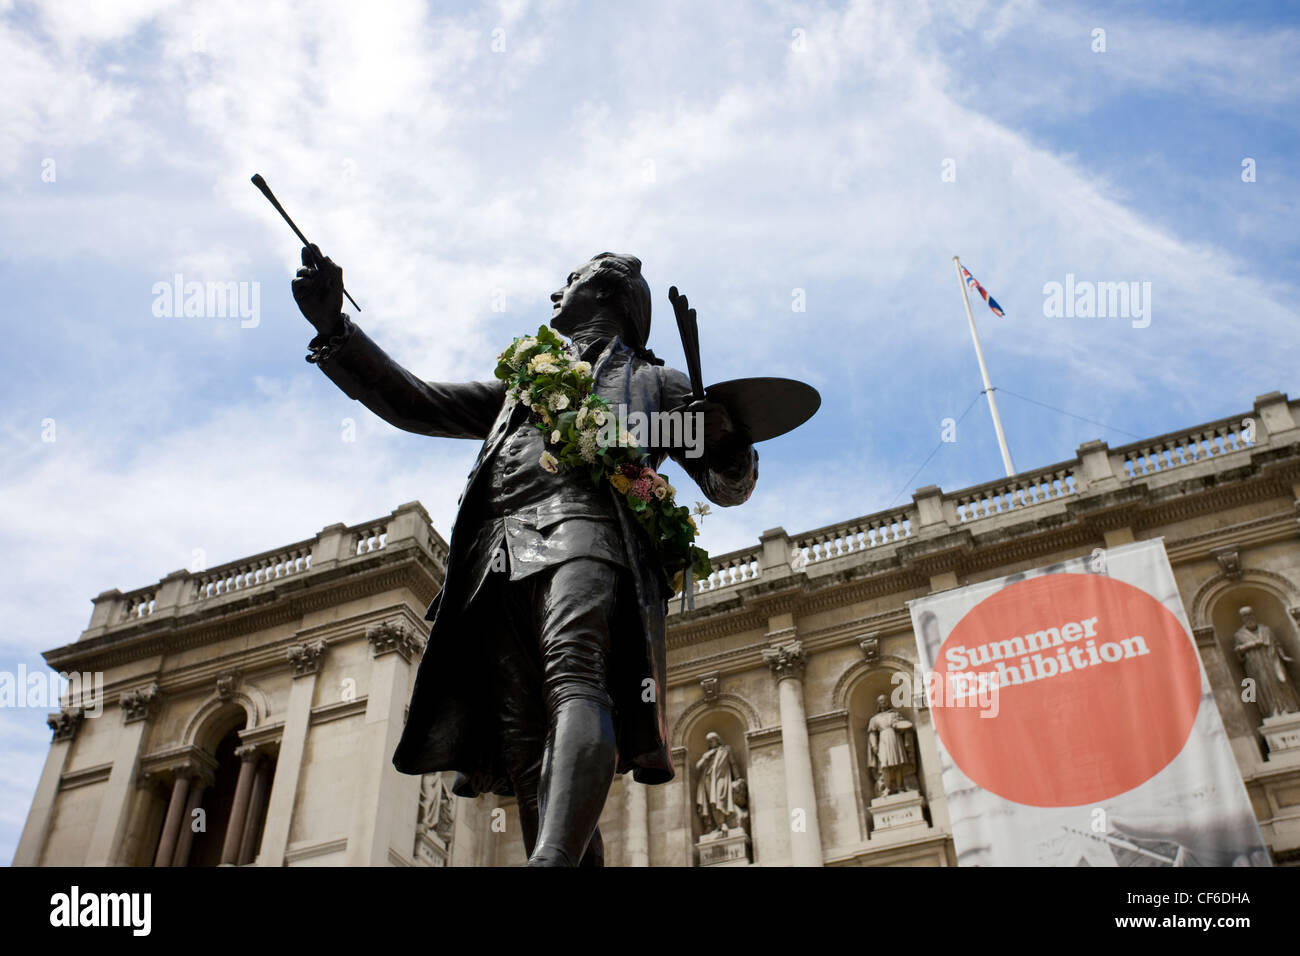 A sculpture of Sir Joshua Reynolds outside the Royal Academy of Arts in front of a large banner advertising the annual summer ex Stock Photo